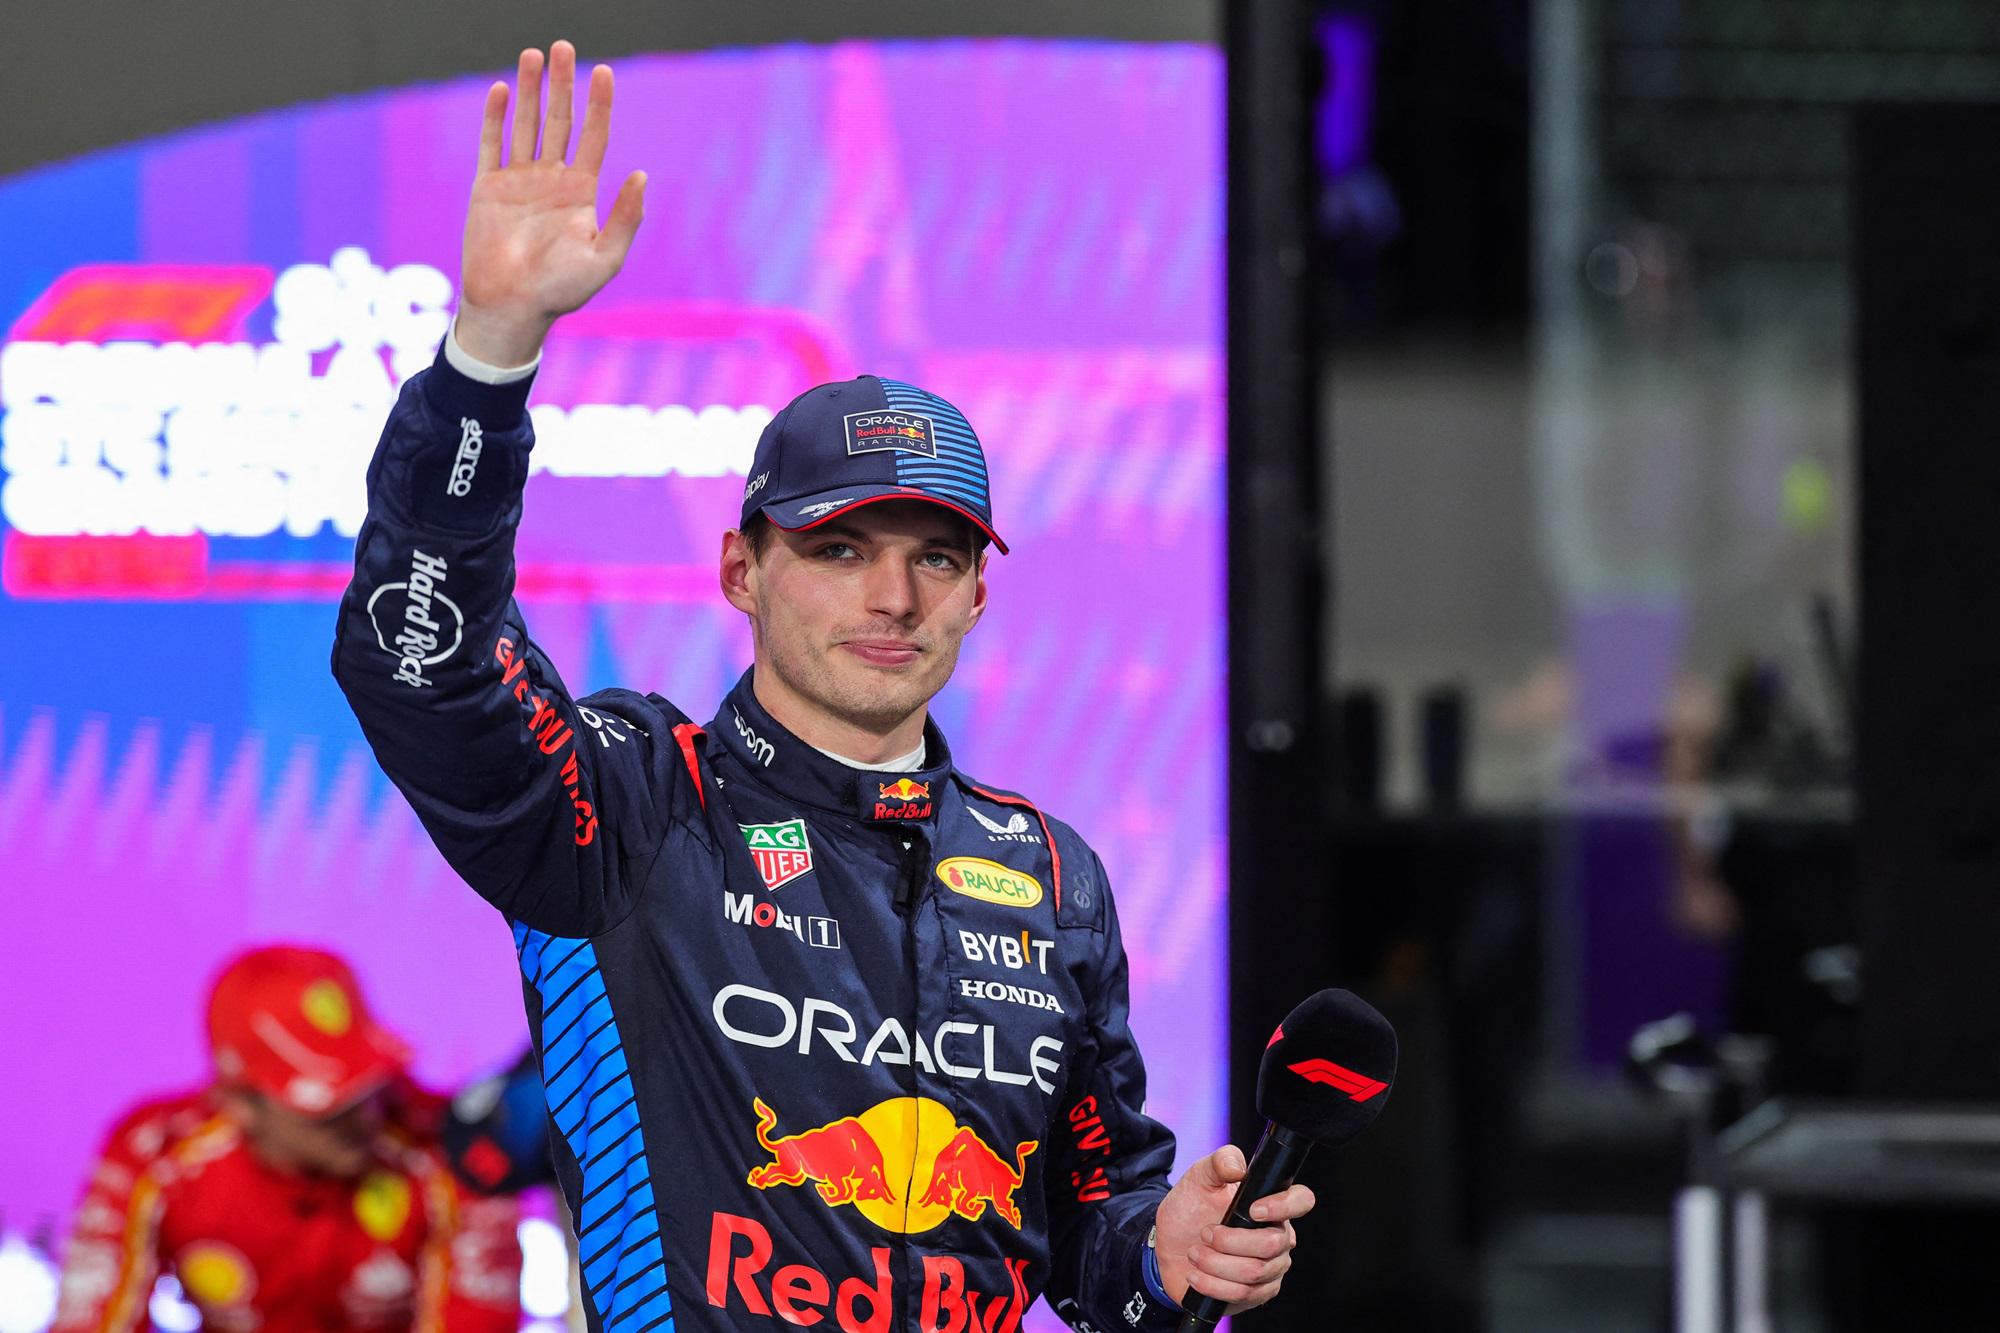 Verstappen at Mercedes and Sainz at Red Bull: the scenario